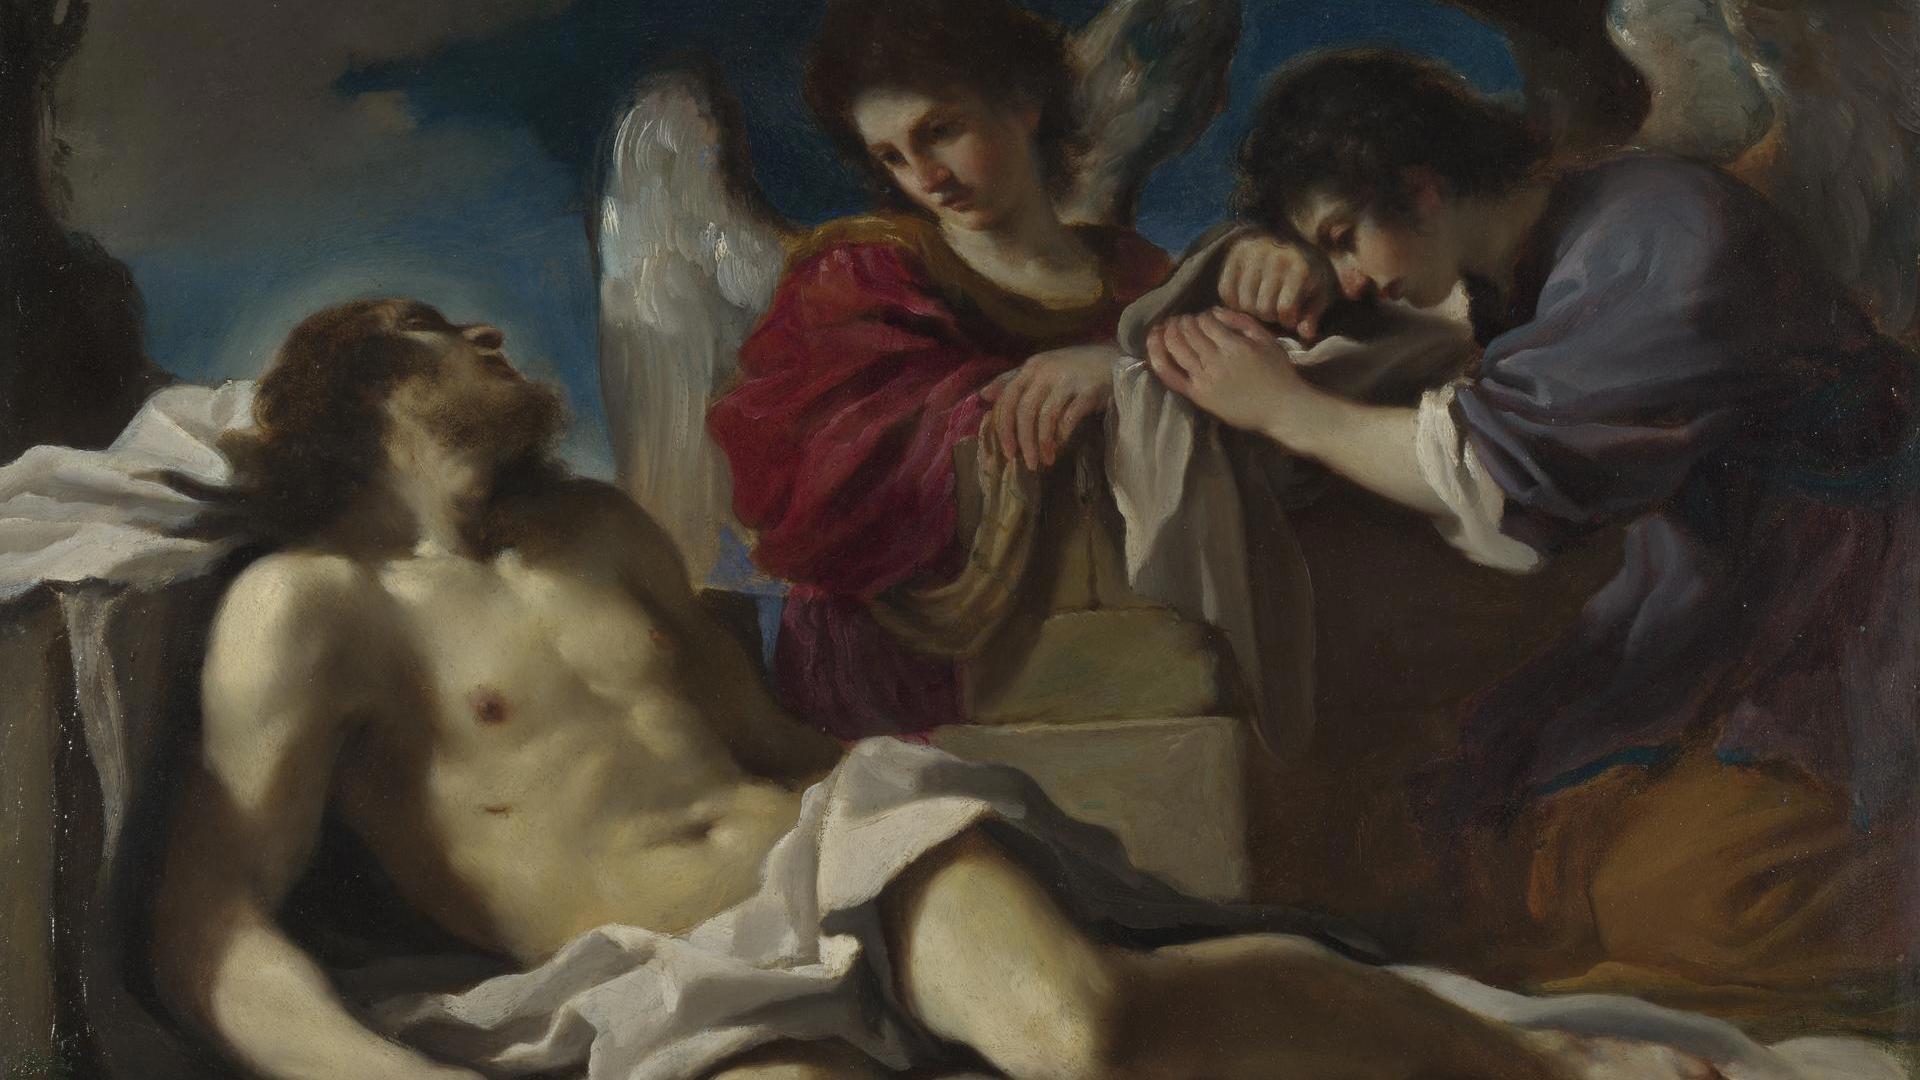 The Dead Christ mourned by Two Angels by Guercino